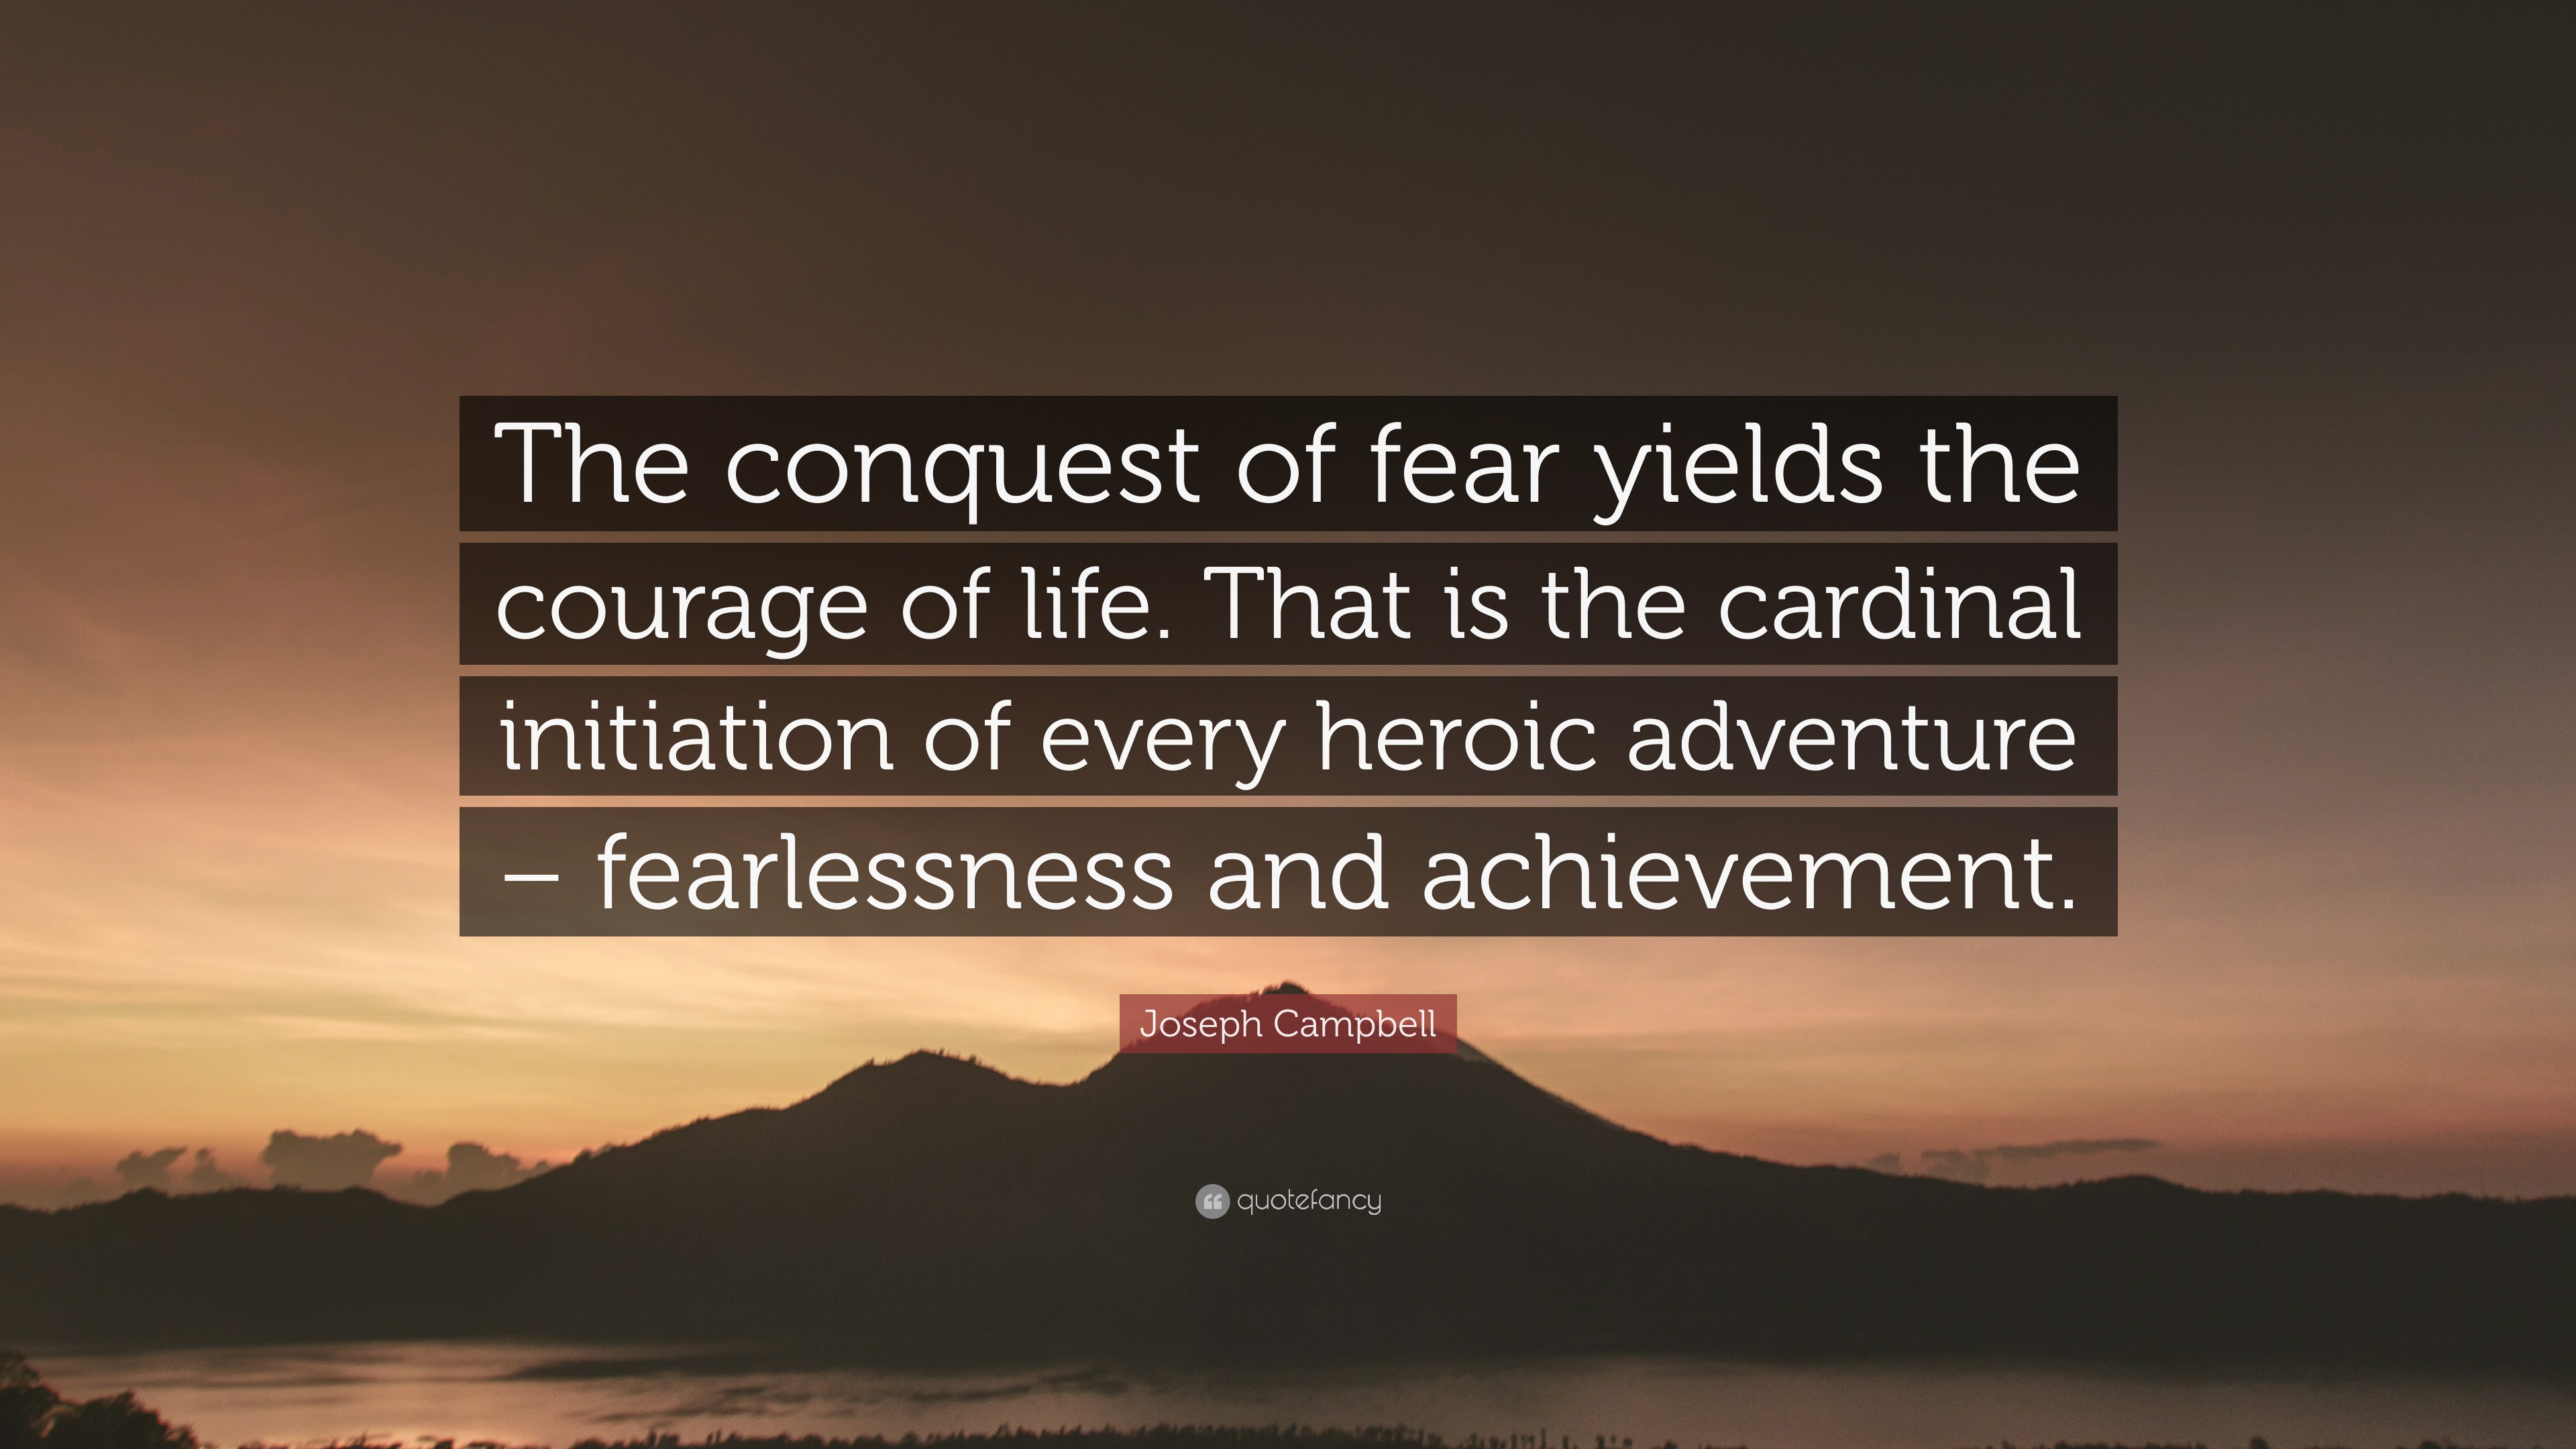 A life of adventure: It's not about being fearless